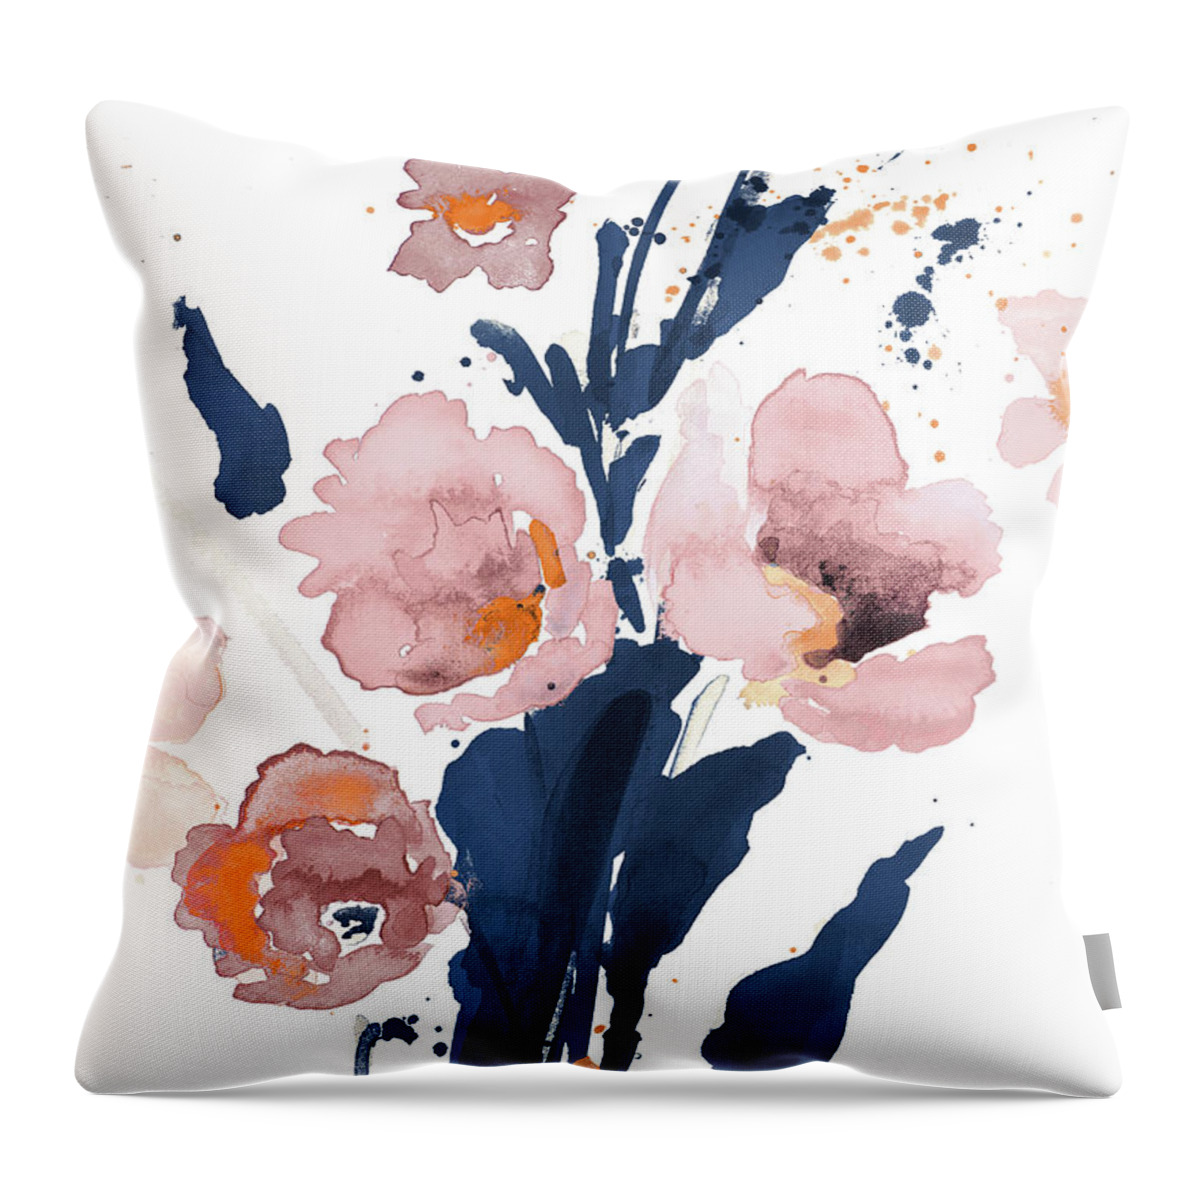 Watercolor Throw Pillow featuring the painting Watercolor Pink Poppies I by Lanie Loreth